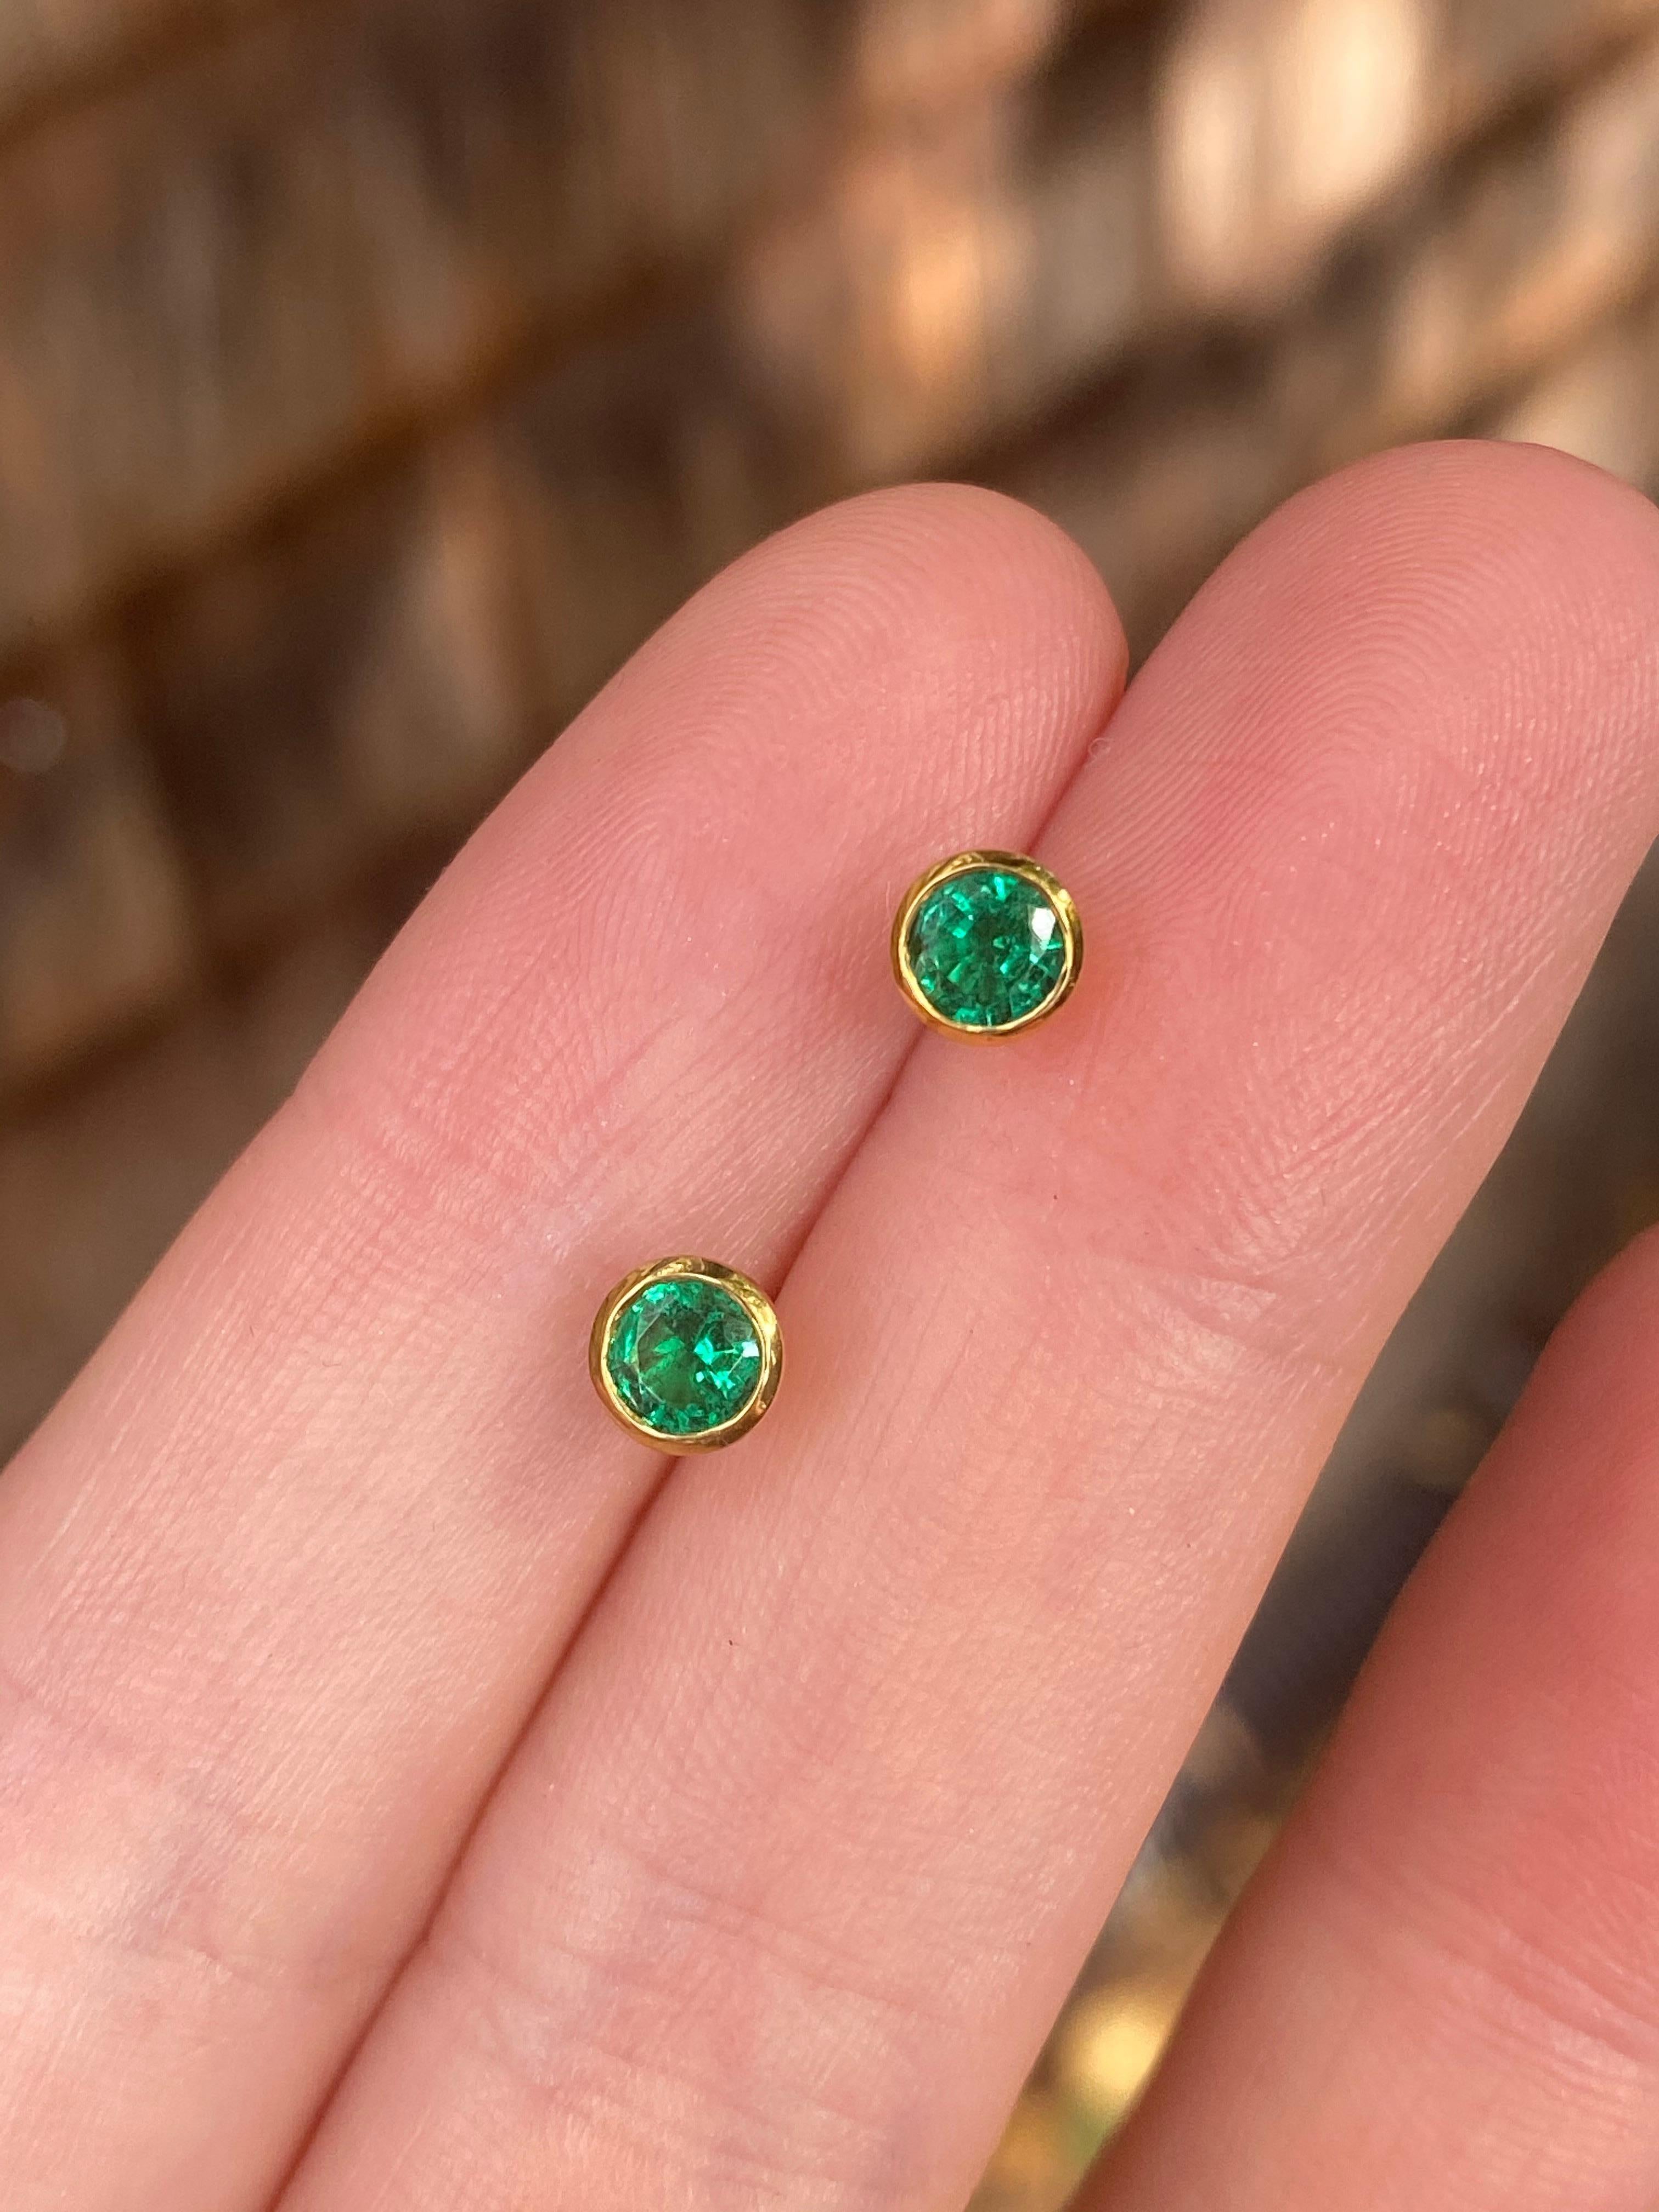 Round Cut Colombian Emerald Round Stud Earrings Handmade 22 Karat Gold For Sale